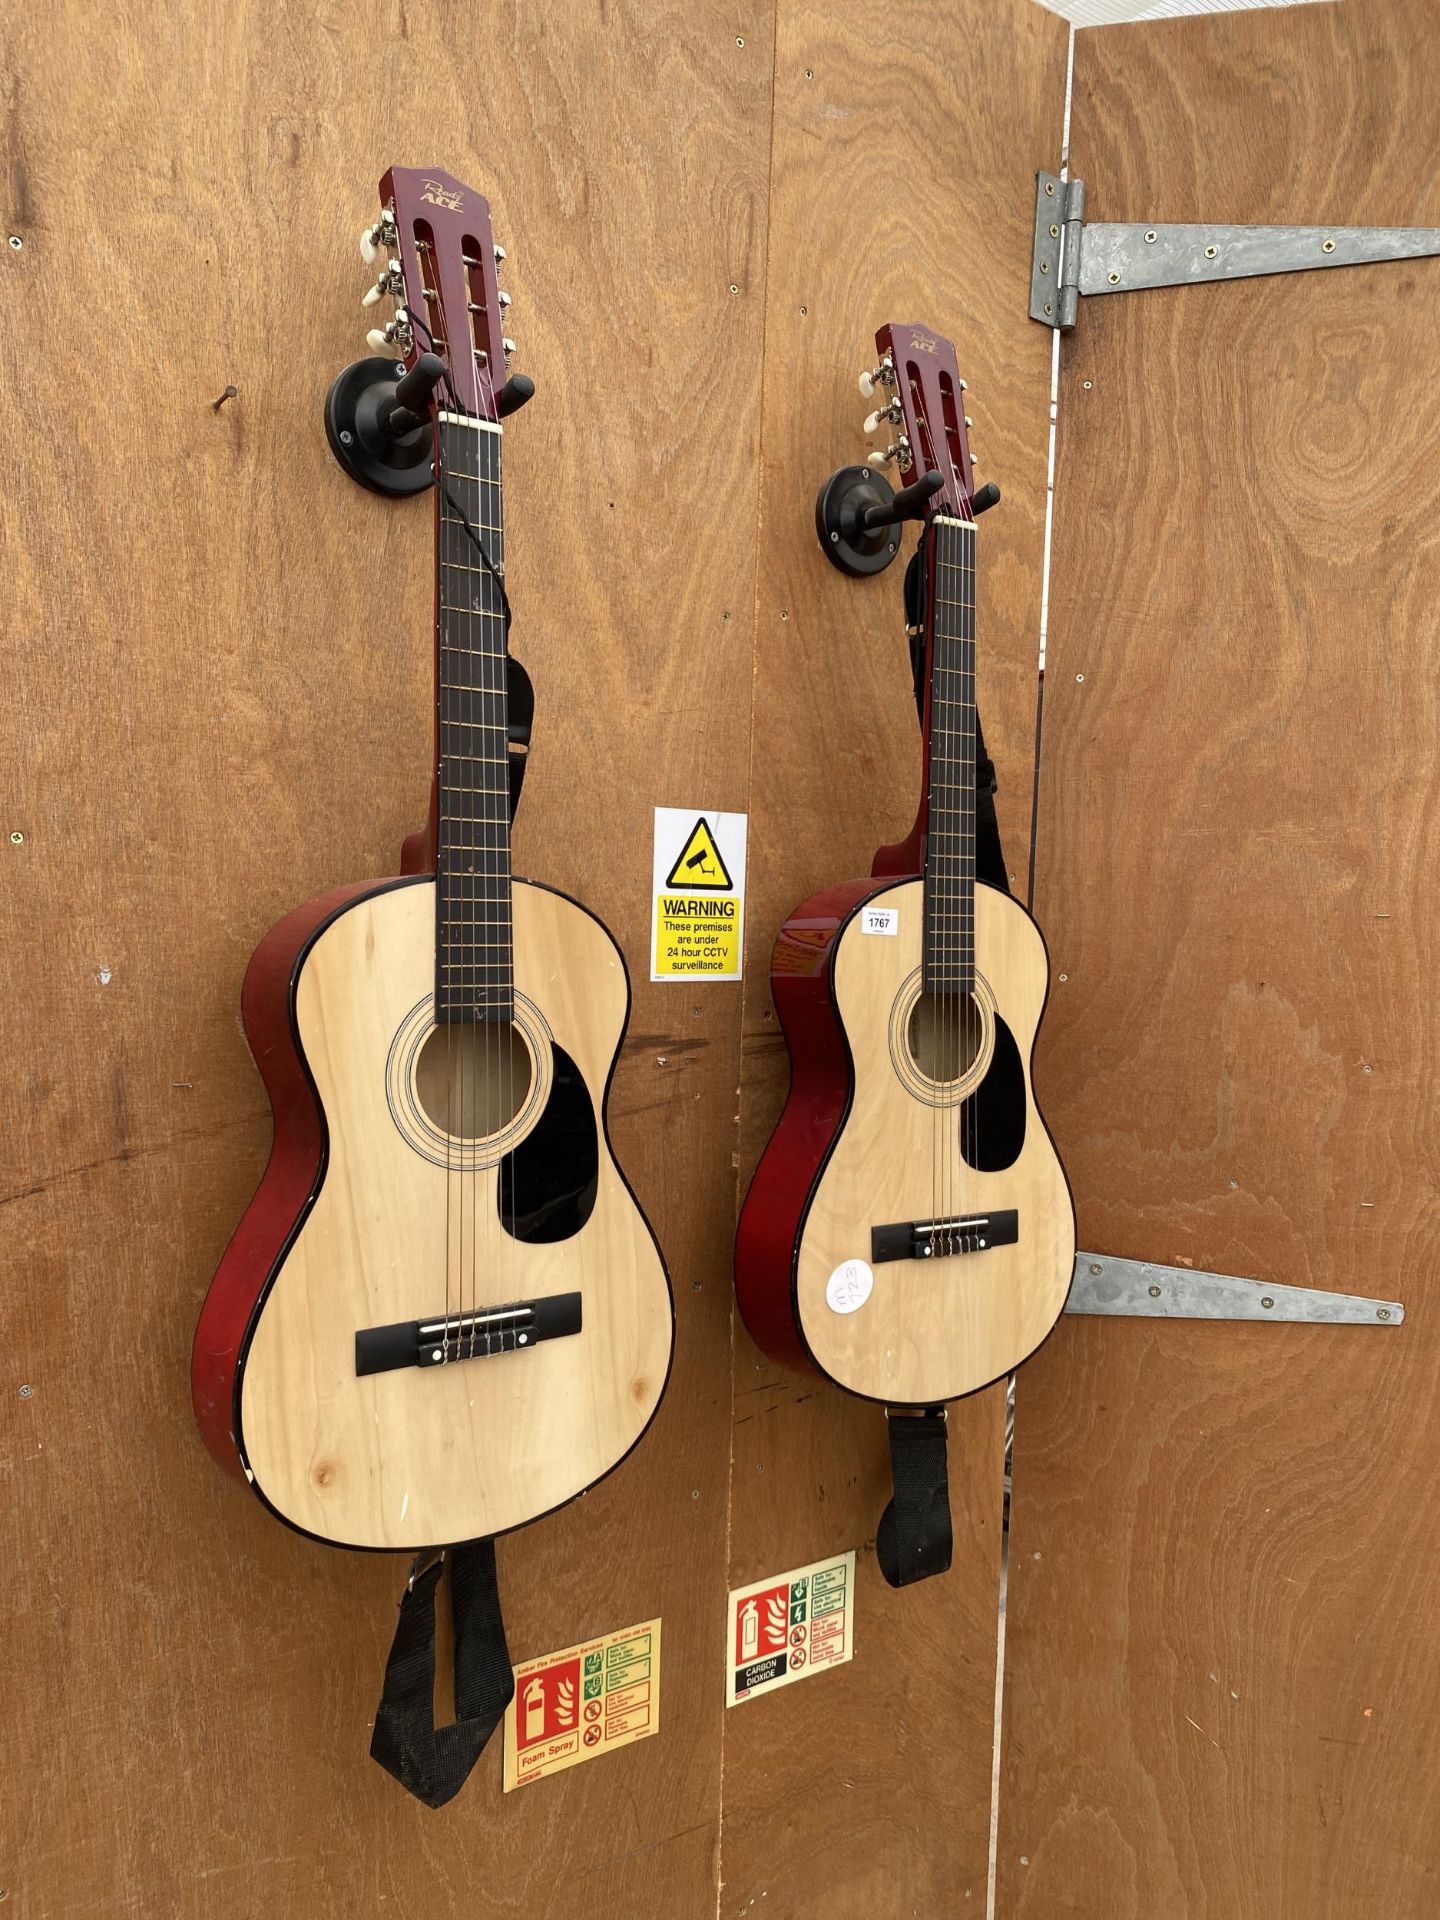 A PAIR OF READY ACE ACOUSTIC GUITARS